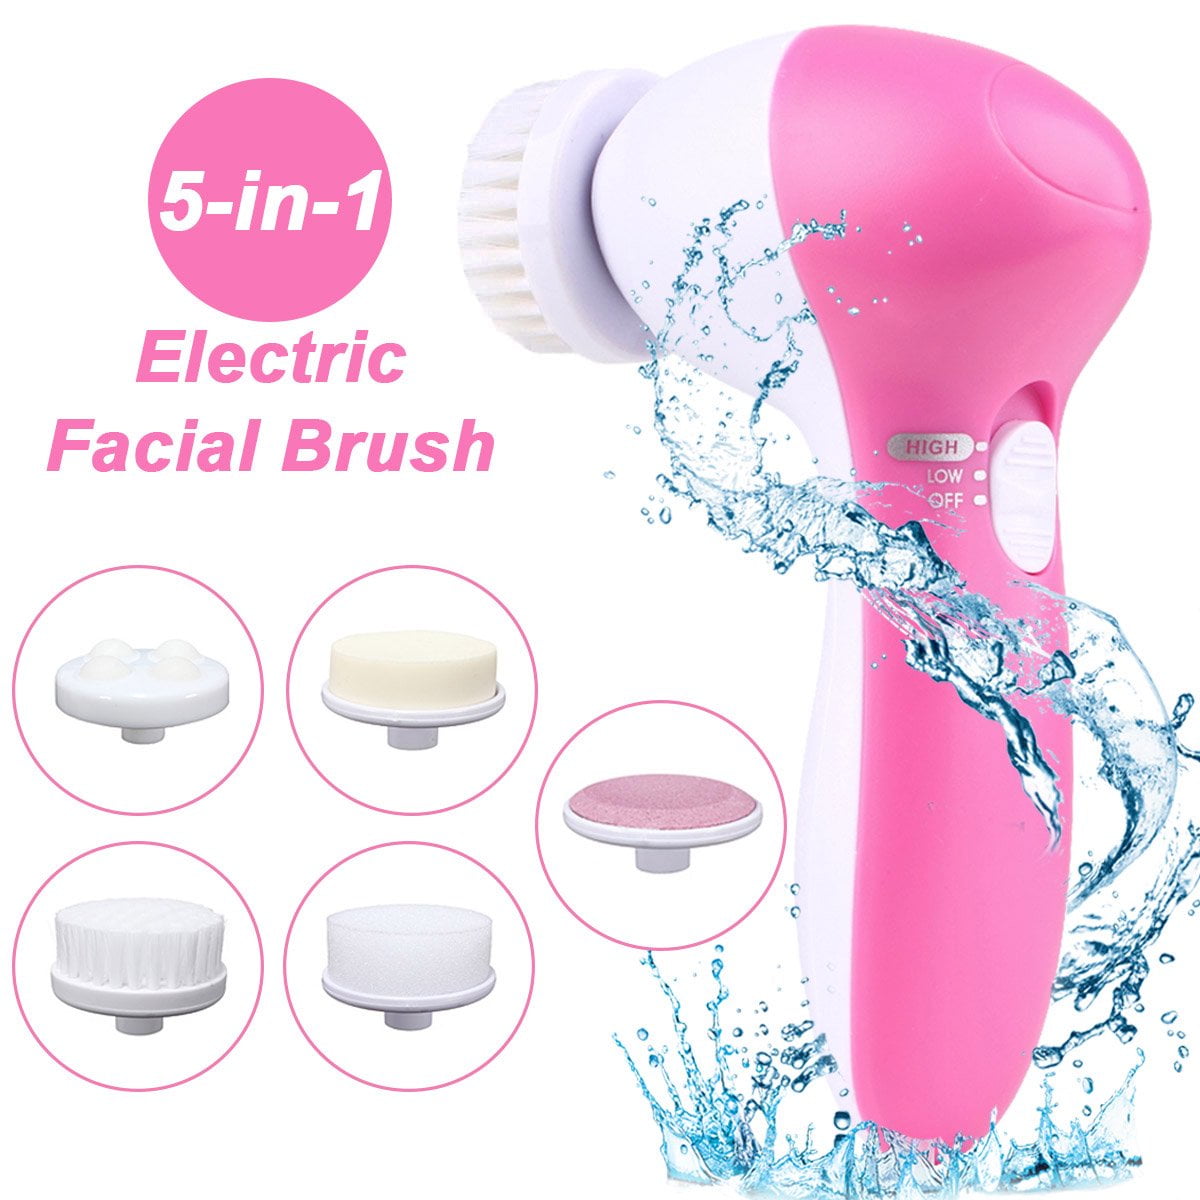 5 in 1 Multifunction Electric Electronic Beauty Deep Clean Face Skin Facial Cleaner Cleansing Cleanser Care Spin Brush and Massager Scrubber Exfoliator Machine Cleaning System